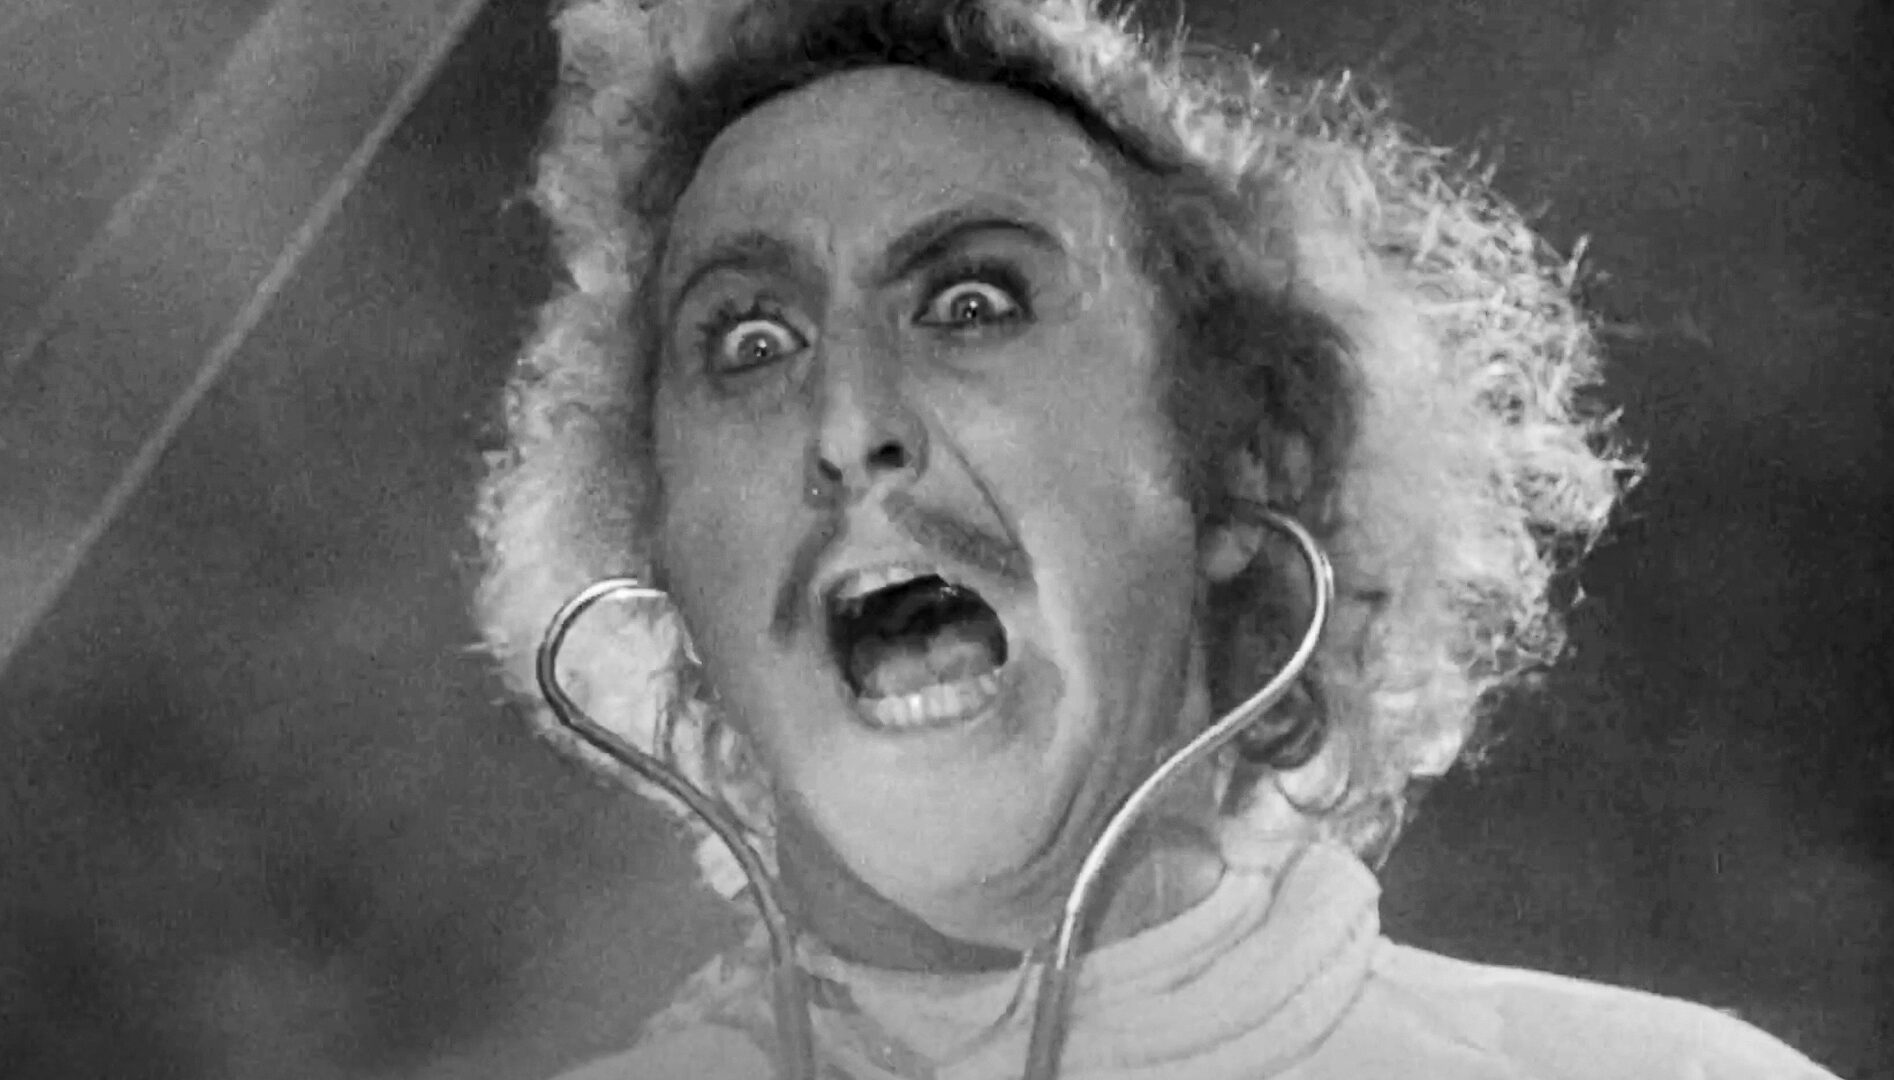 Black and white film still from Young Frankenstein, of Gene Wilder wearing a stethoscope and yelling